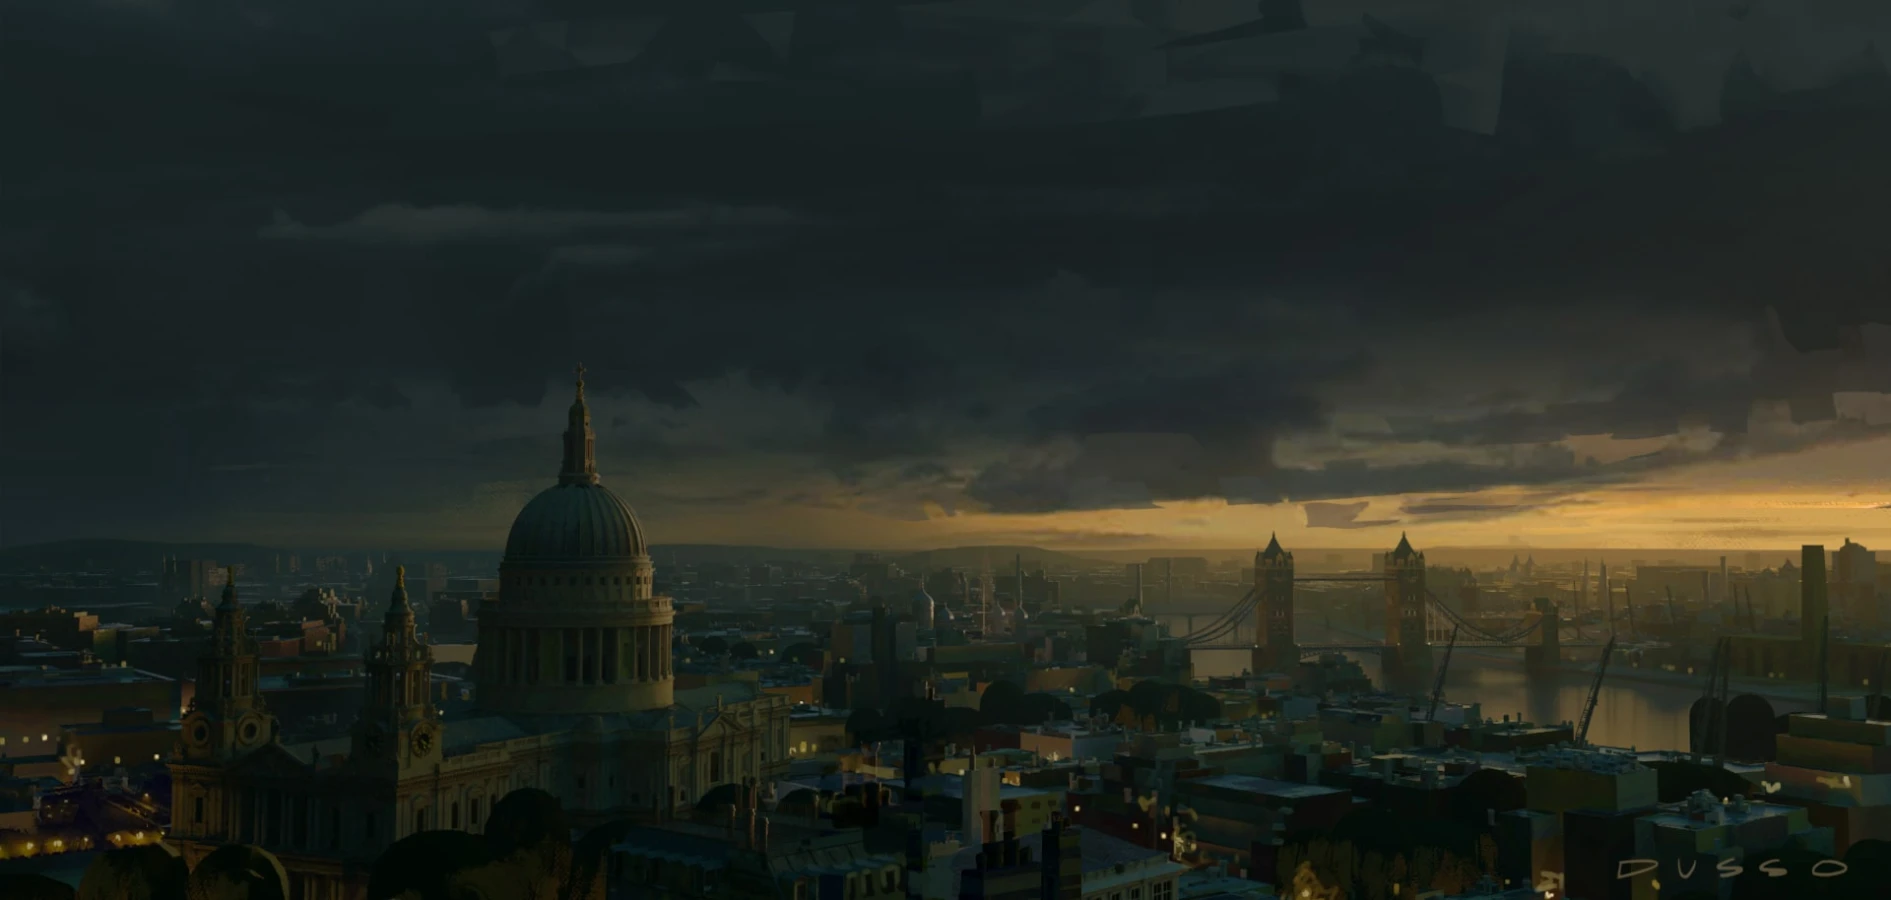  Dark view of London concept art from Raynault vfx 